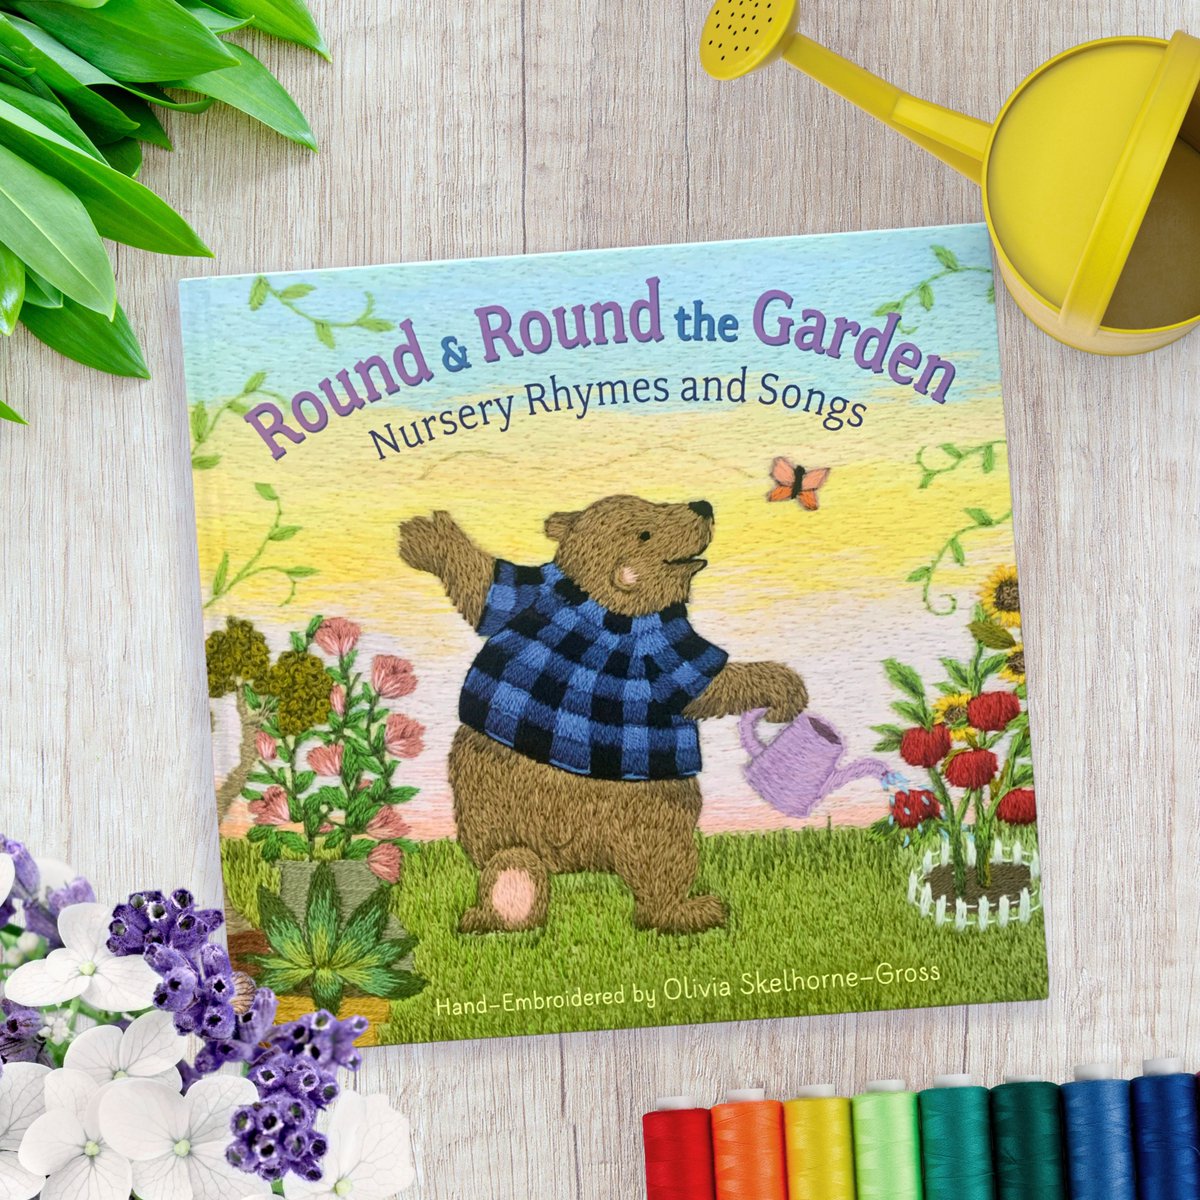 ROUND & ROUND THE GARDEN: a stunning book showcasing embroidery artistry by Hamilton artist, Olivia Skelhorne-Gross. 🎨🧵❤️ This collection of nursery rhymes and songs is perfect for children and adults. Available now! EmbroideryArt #ChildrensBooks #NurseryRhymes #HamiltonArtis